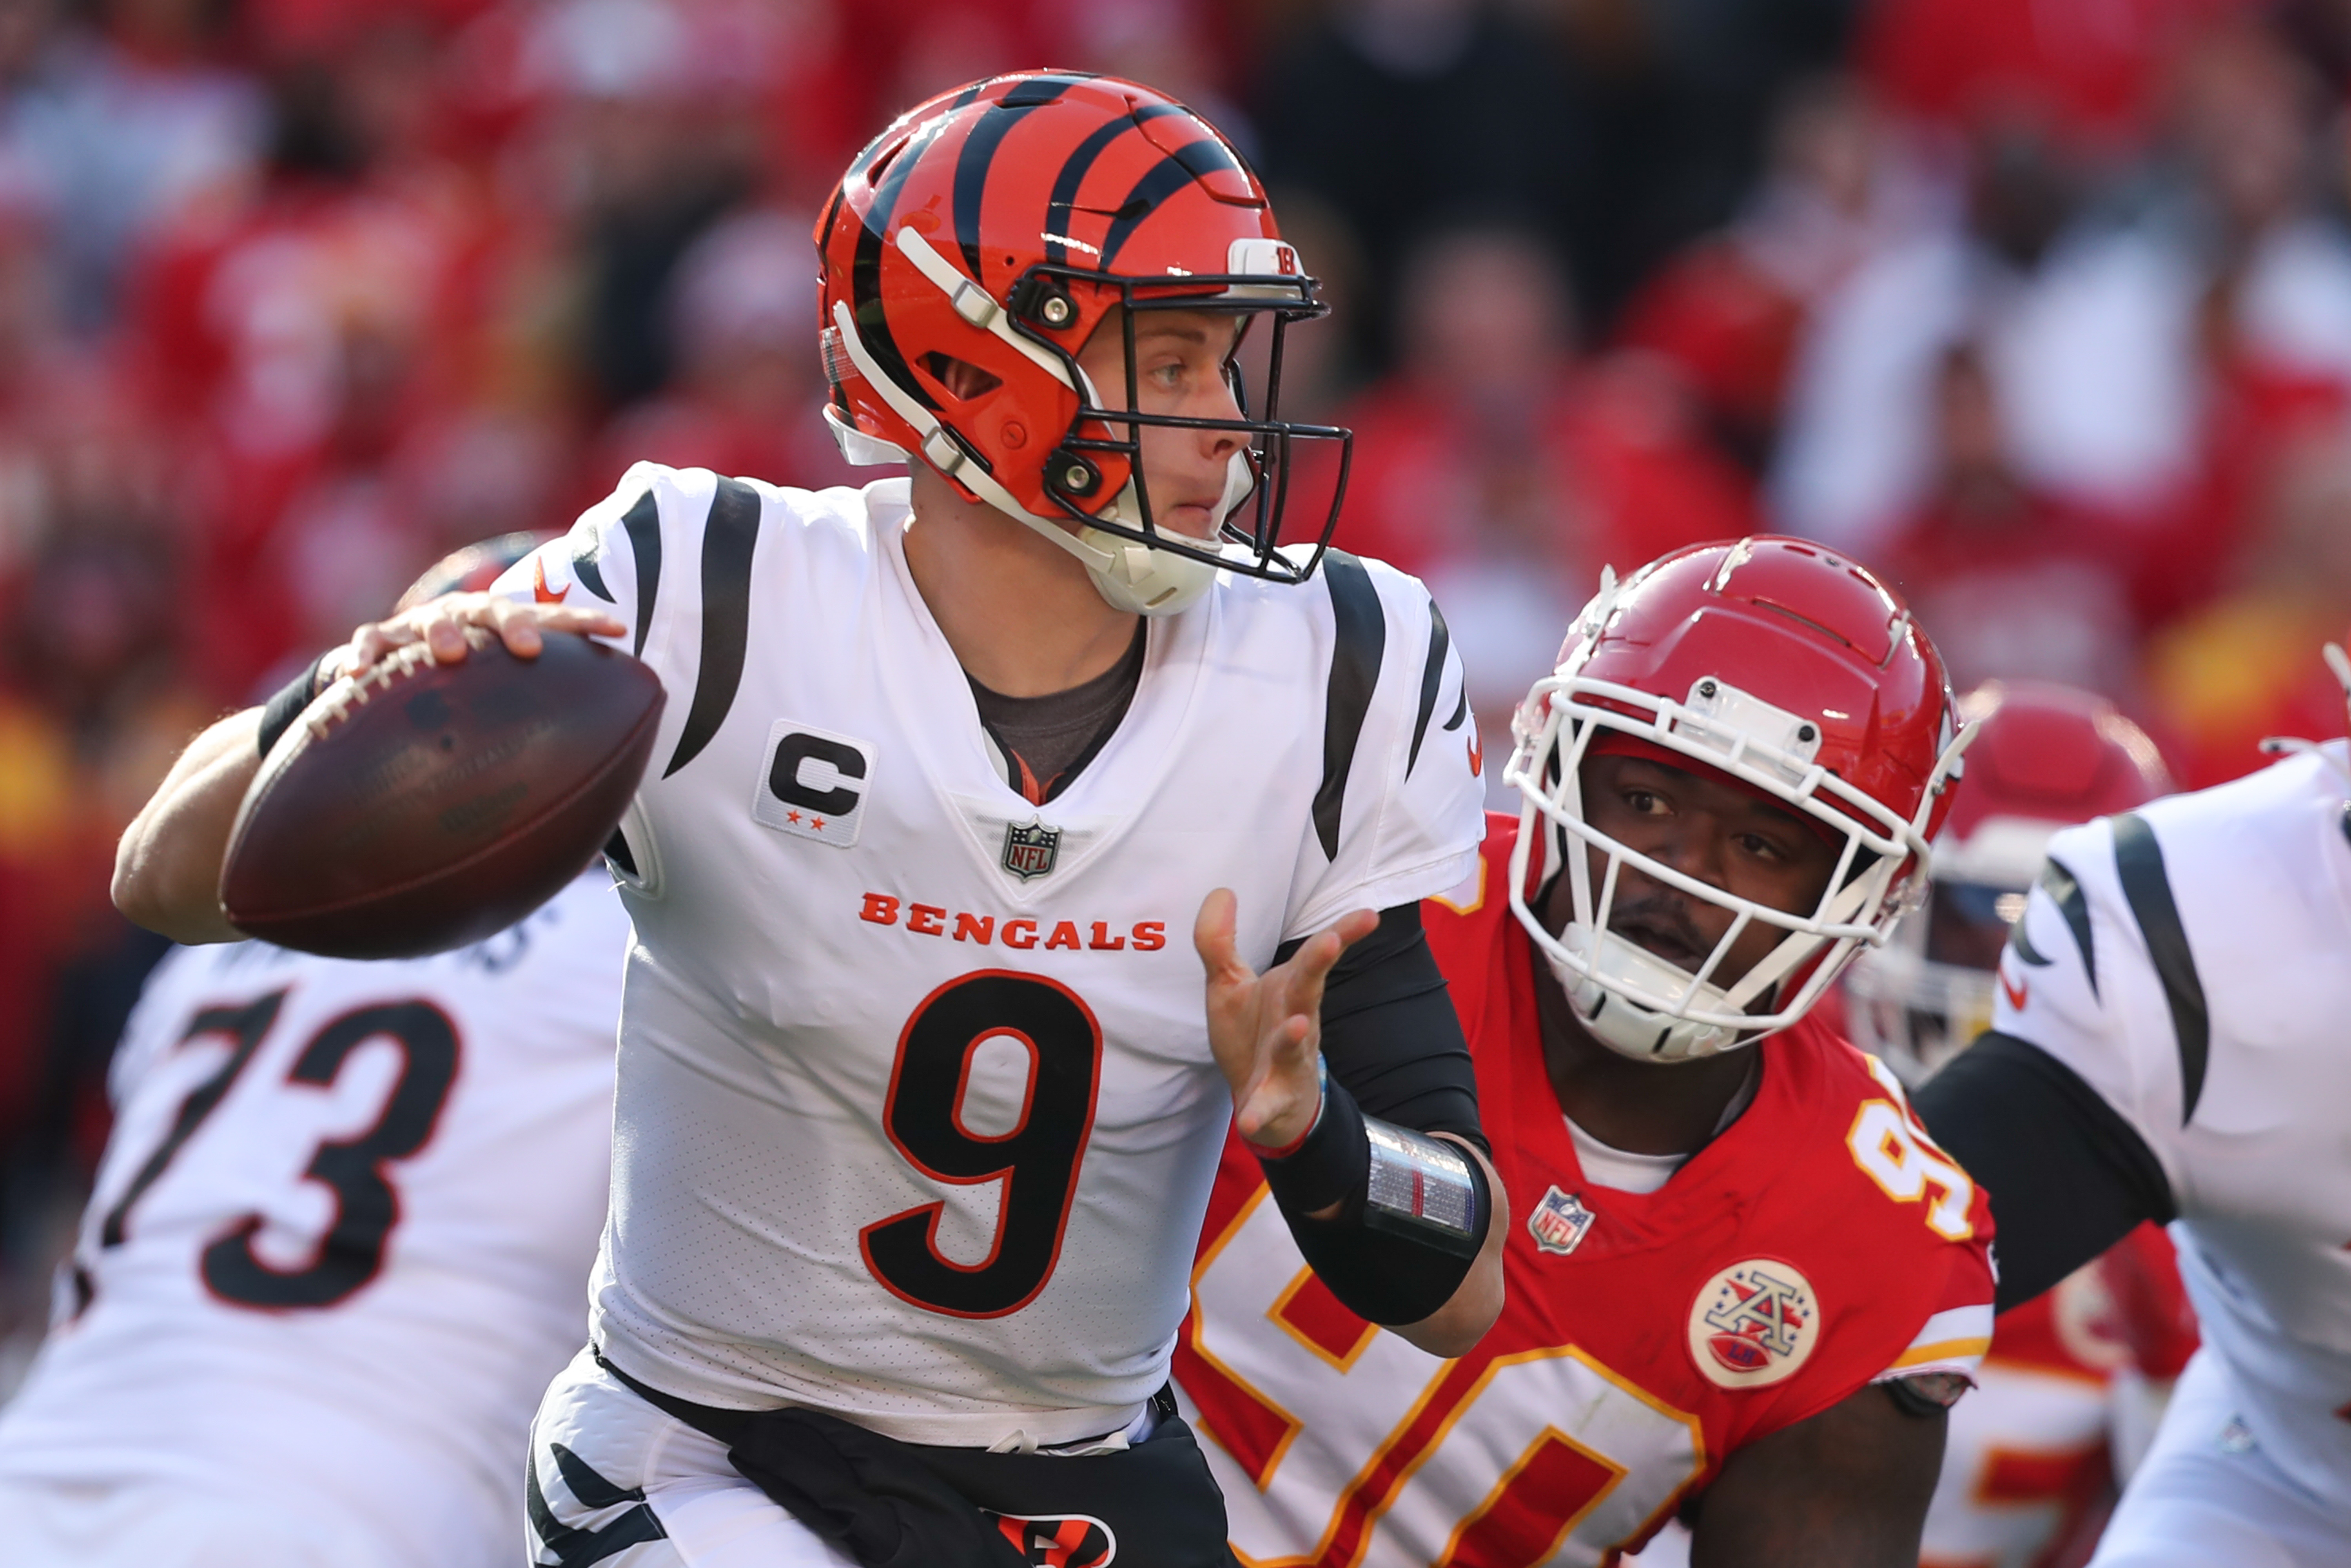 An image of Joe Burrow, #9, quarterback for the Cincinnati Bengals, during the AFC Championship game against the Kansas City Chiefs.